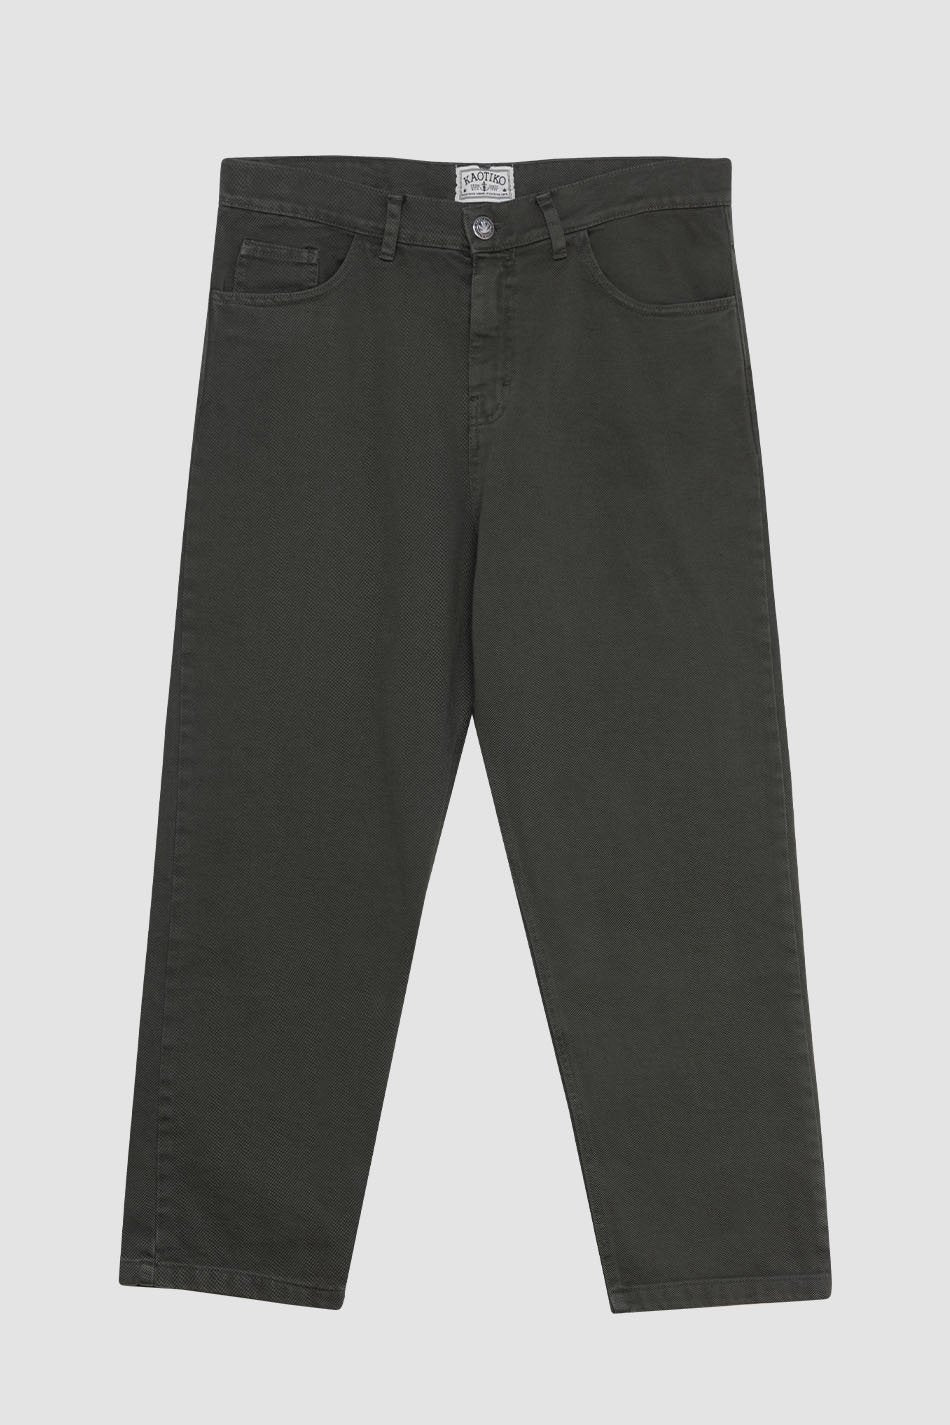 Dark Army Regular Cropped Trousers